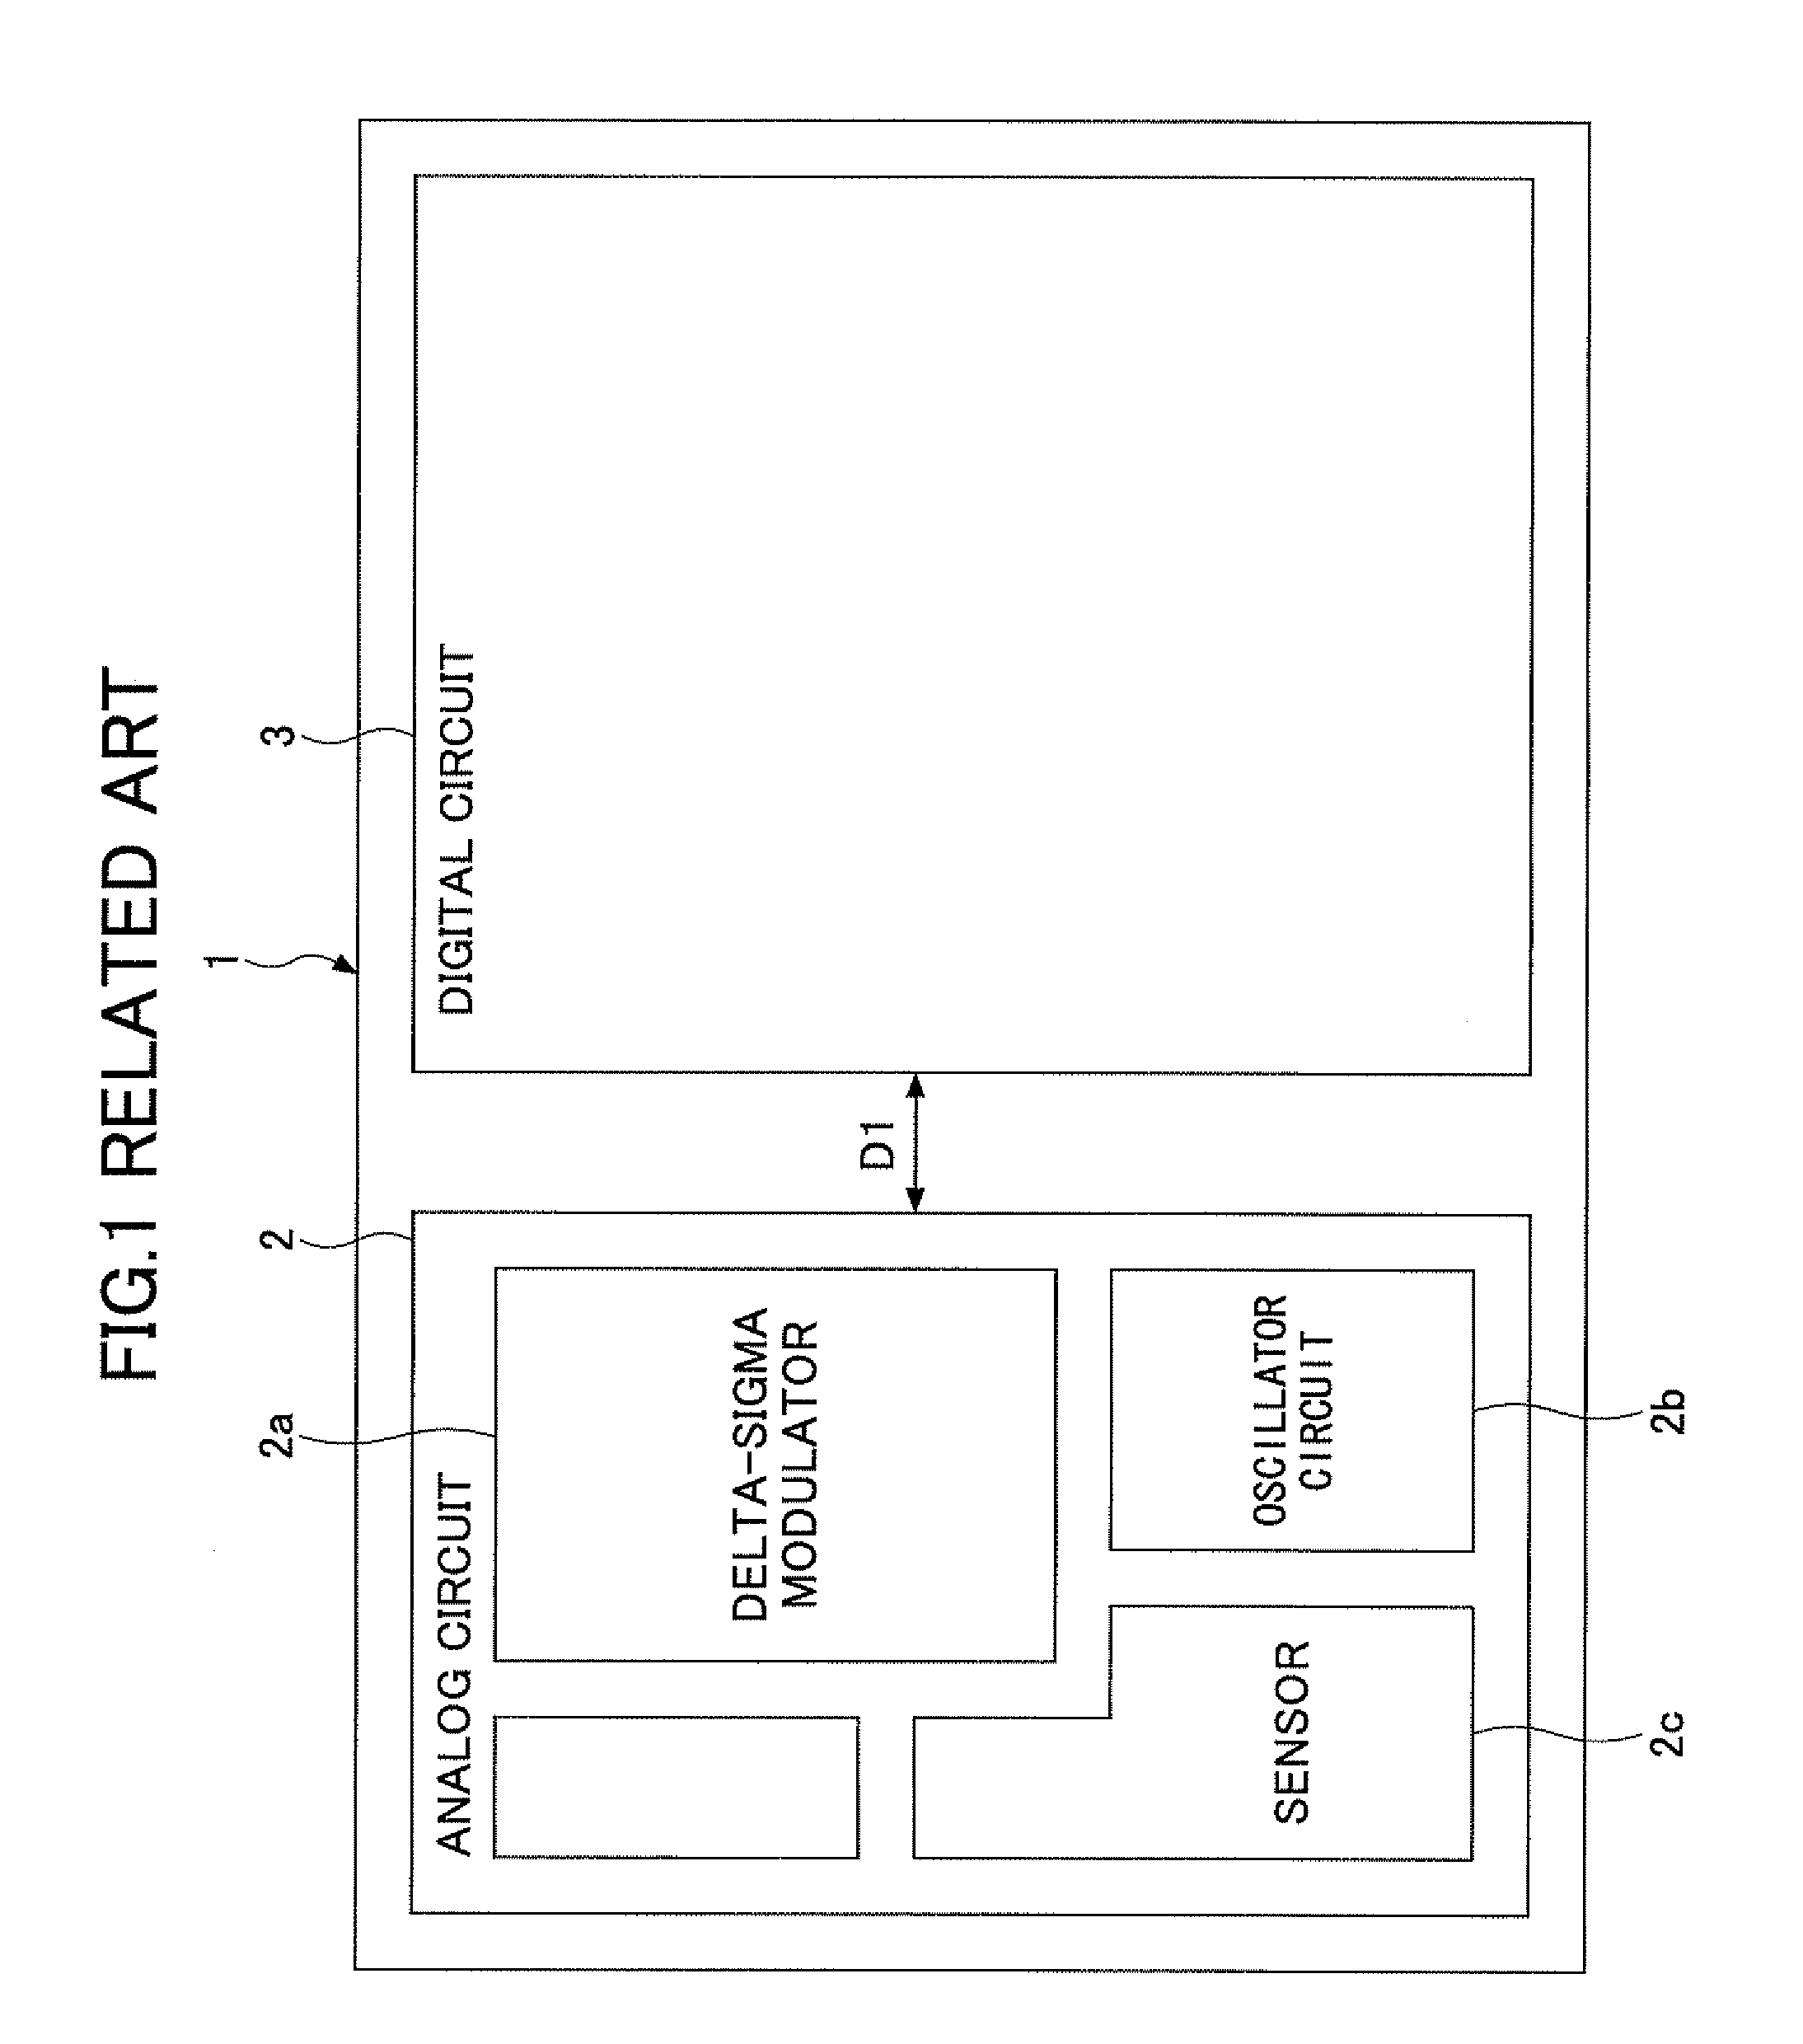 Semiconductor integrated circuit device having analog circuit separated from digital circuit using resistive and capacitive element regions